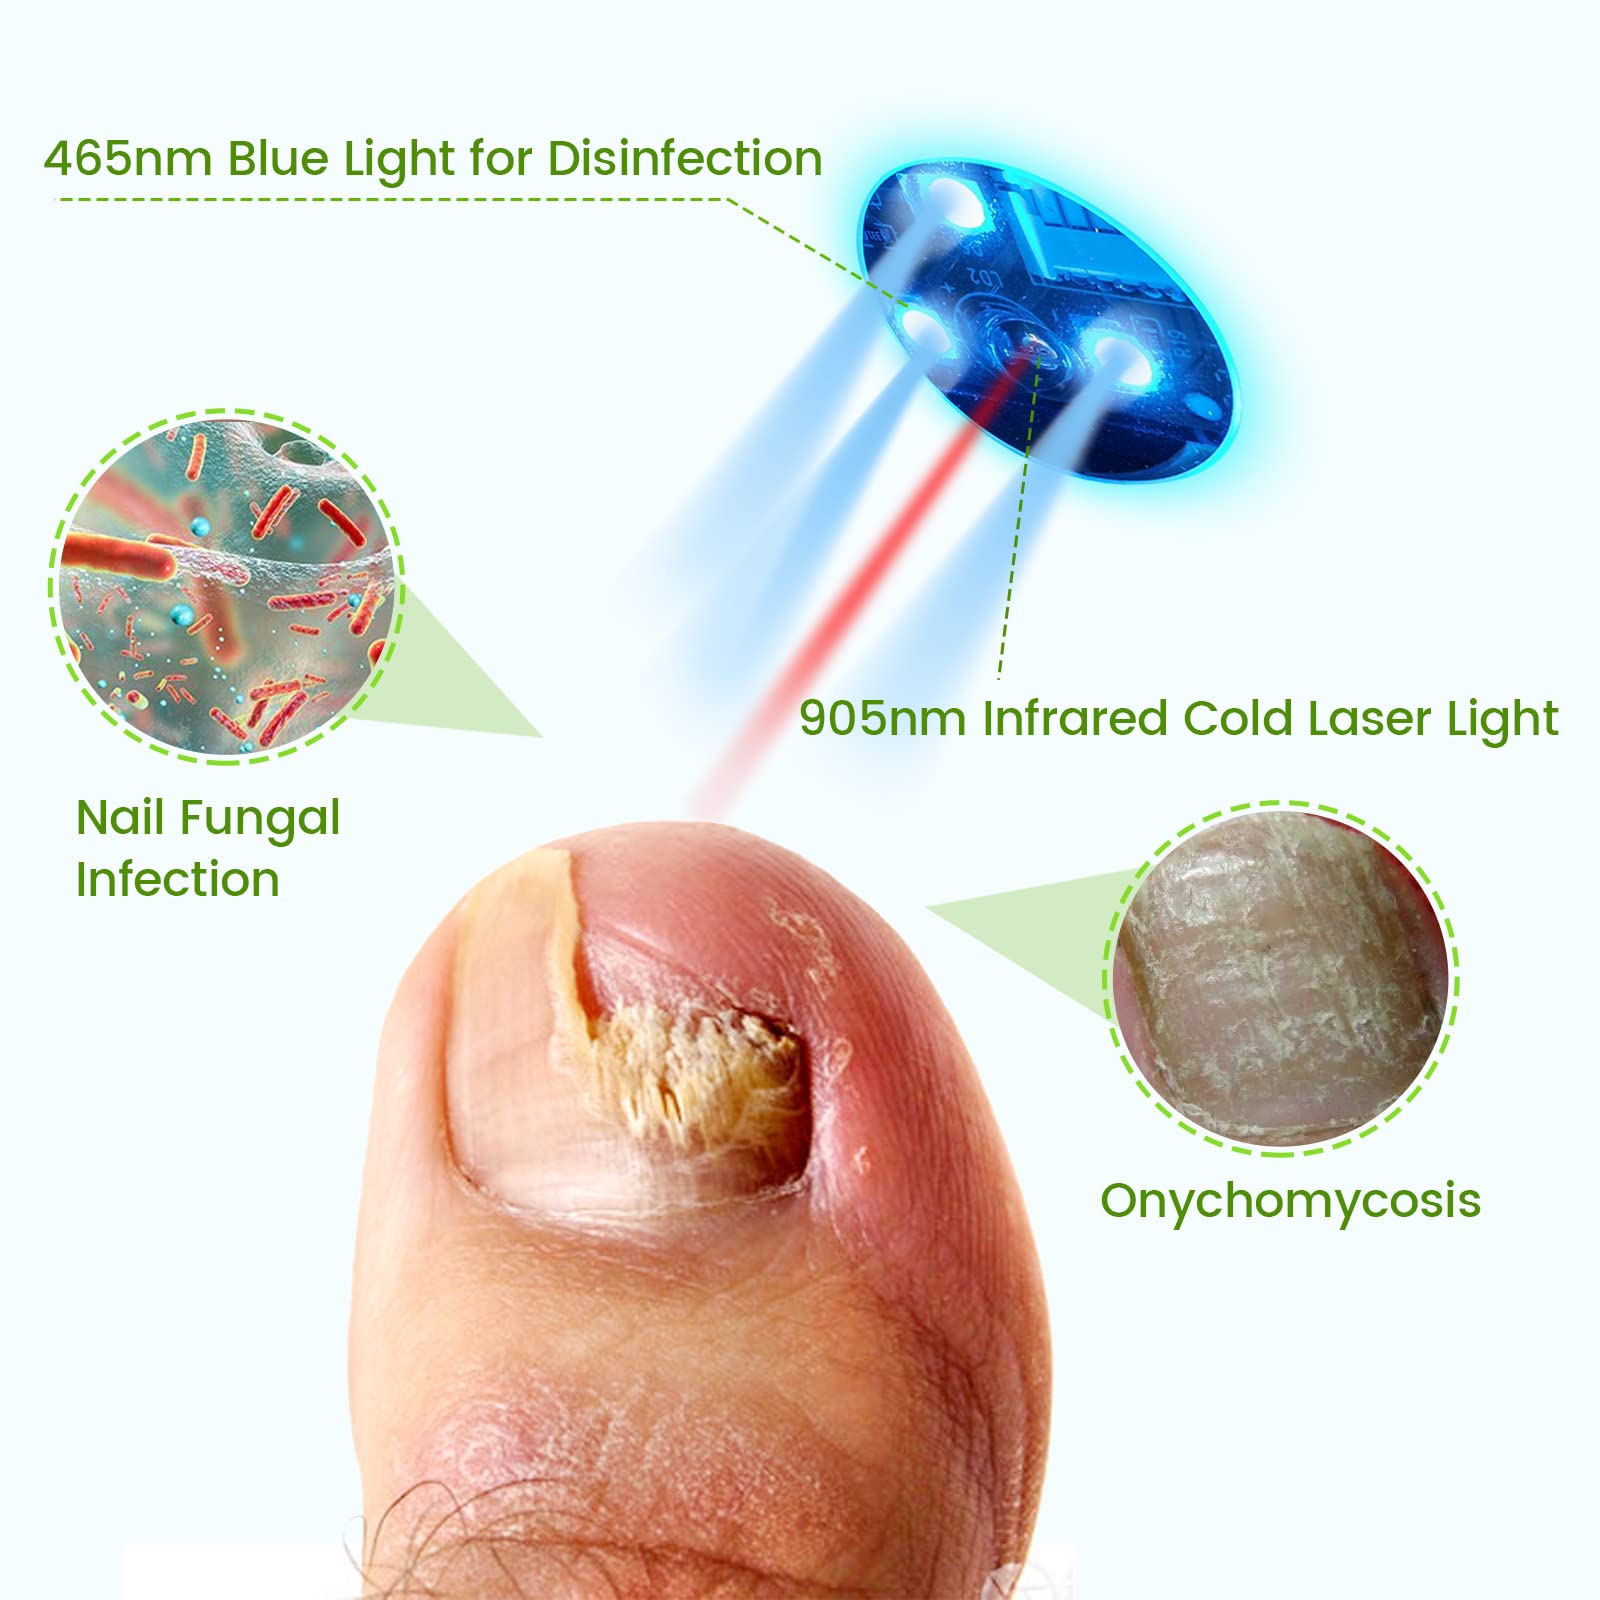 pinfriy Nail Fungus Cleaning Device Home Treatment for Toenail Fungus & Onychomycosis 905nm Infrared Light+ 470nm Blue Light